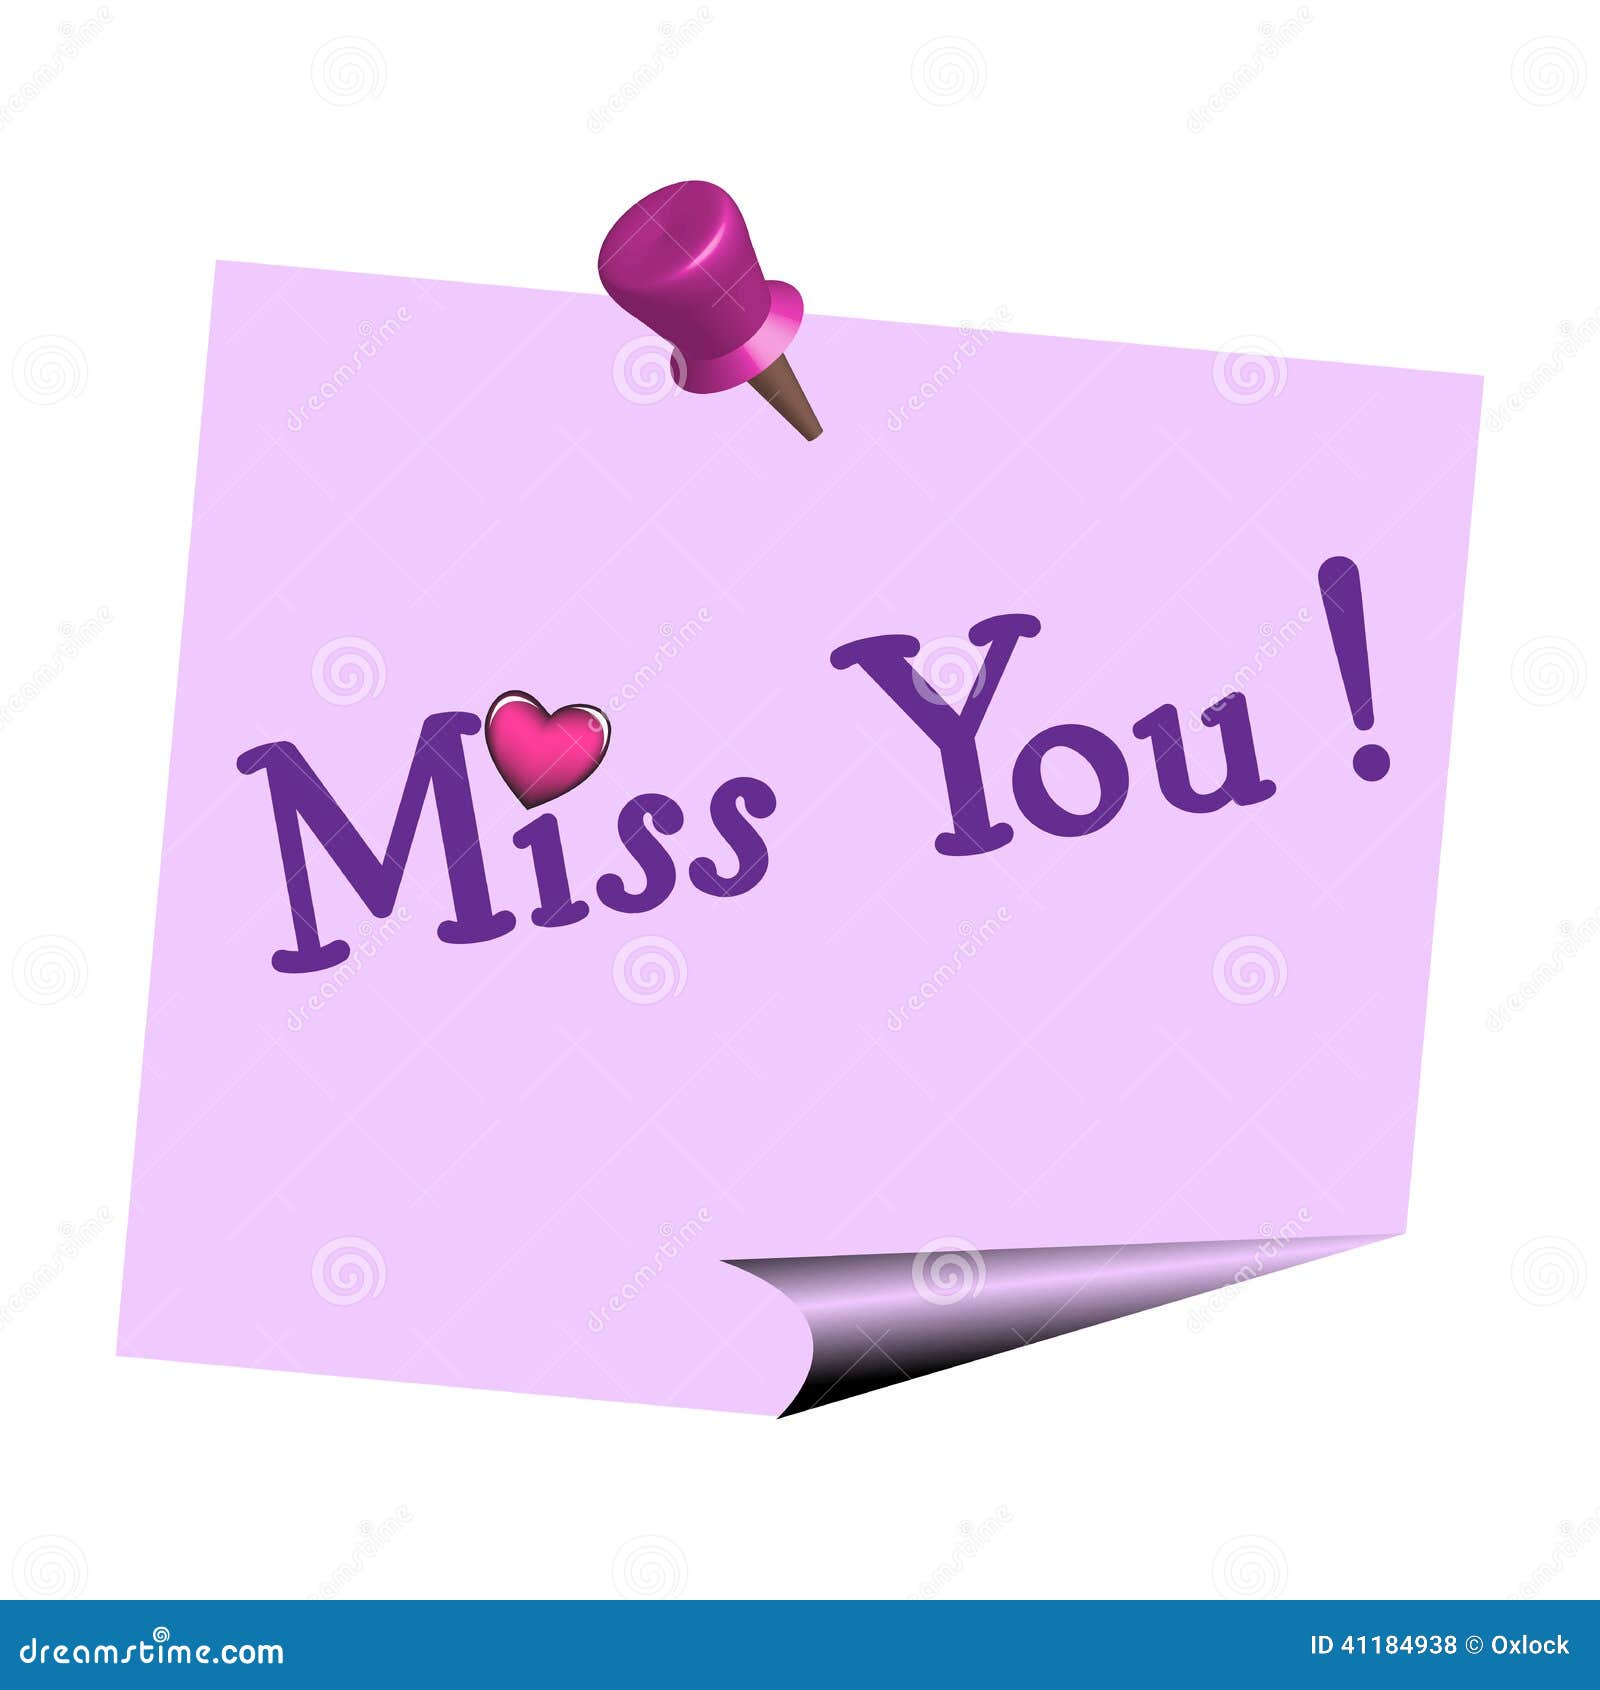 Miss you note stock vector. Illustration of loneliness - 41184938